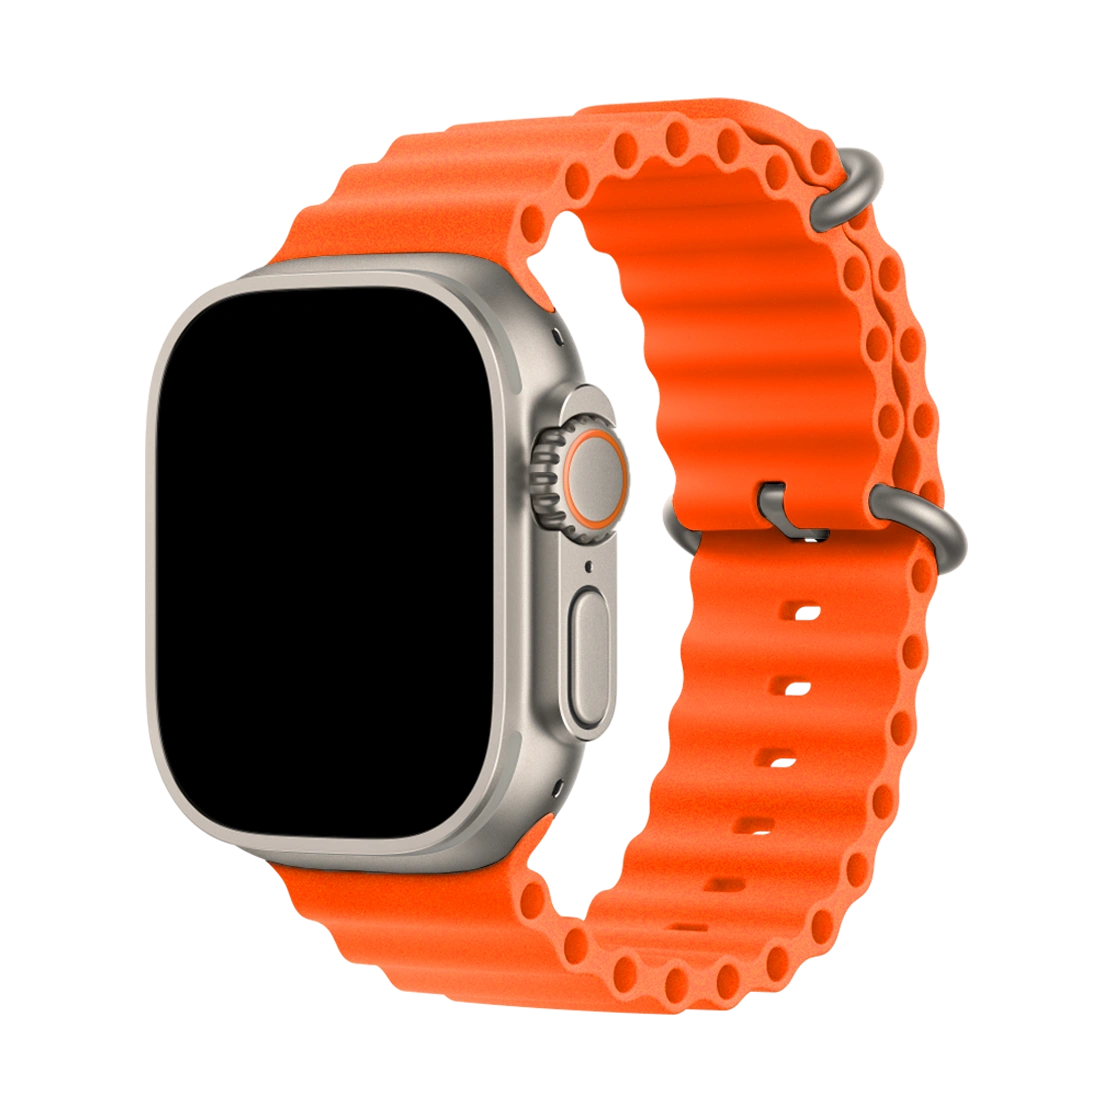 Apple Watch SE 2 Midnight Aluminum Case with Nike Midnight Sport Band